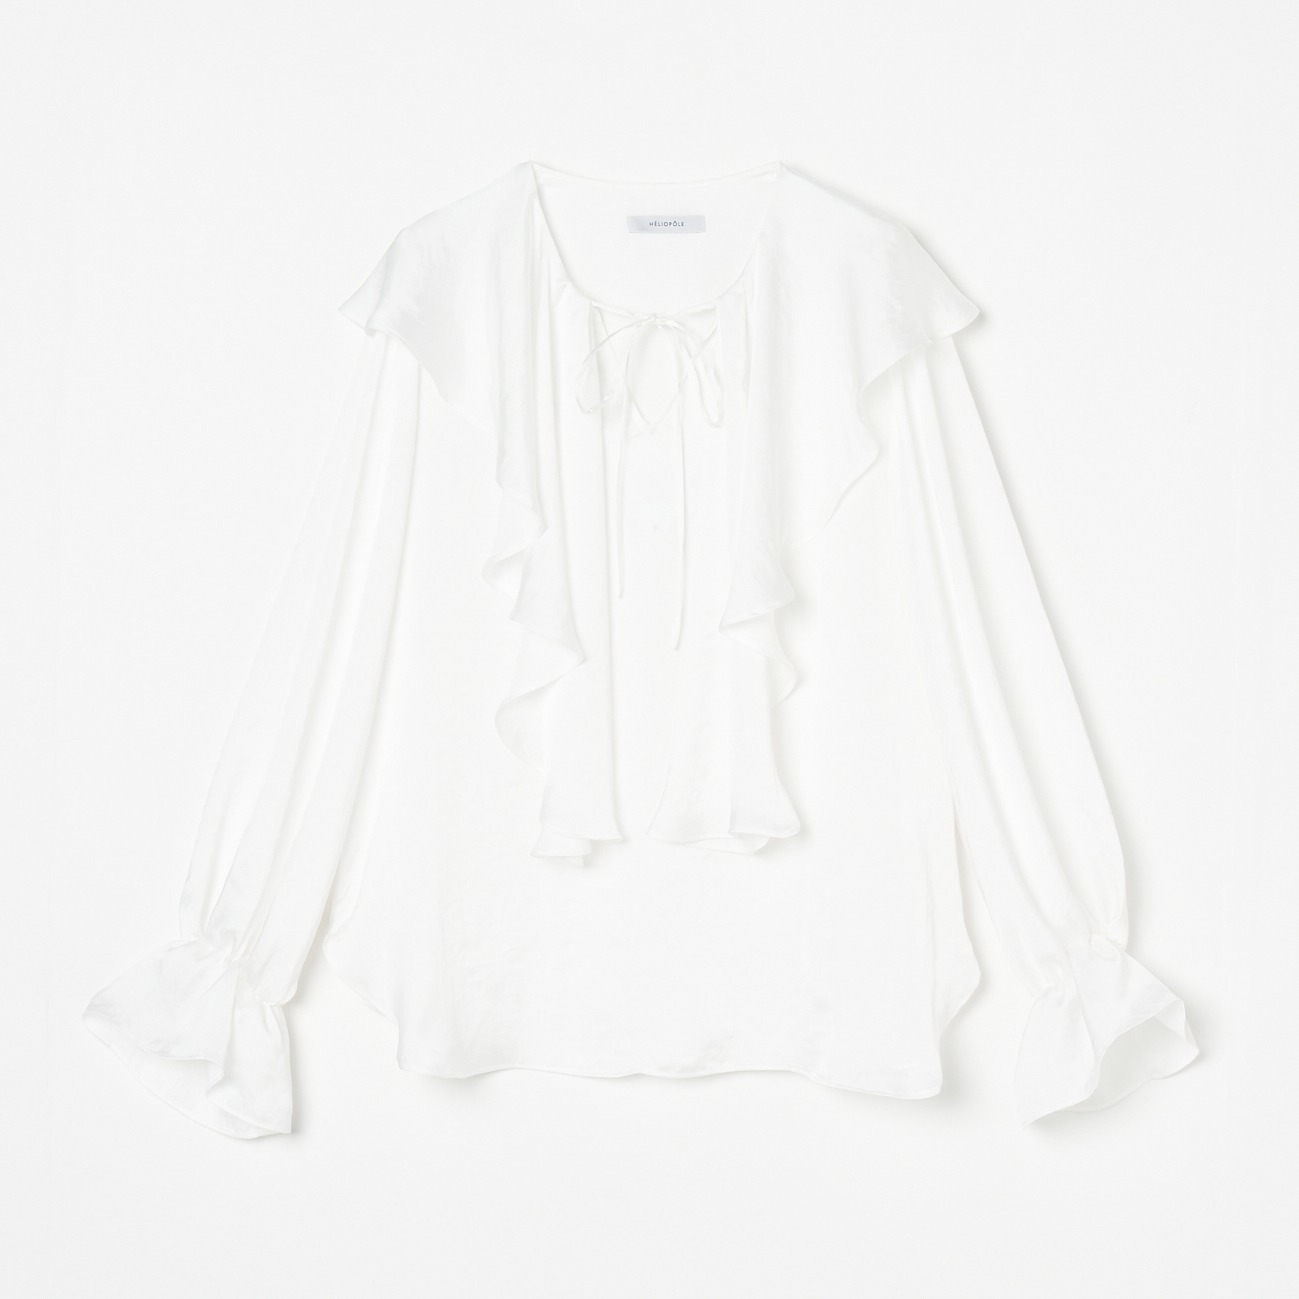 BOW&FRILL BLOUSE 詳細画像 ホワイト 1